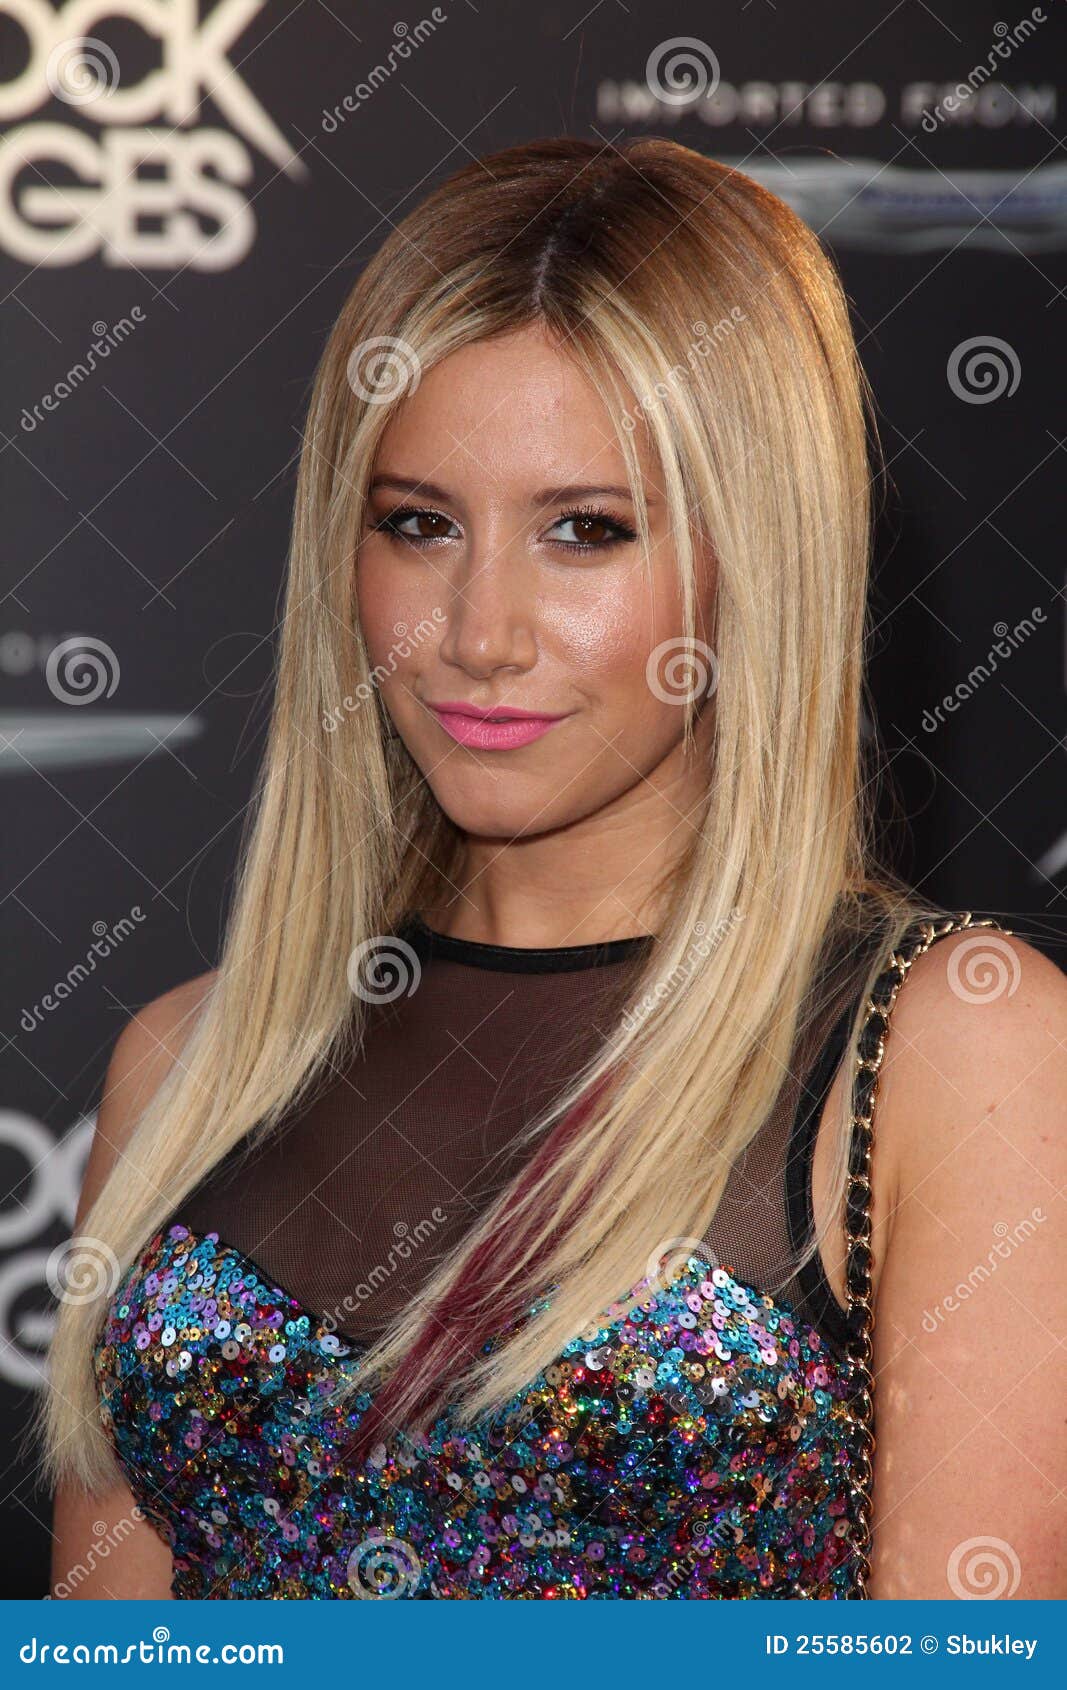 chintan gajera recommends ashley tisdale naked photo pic